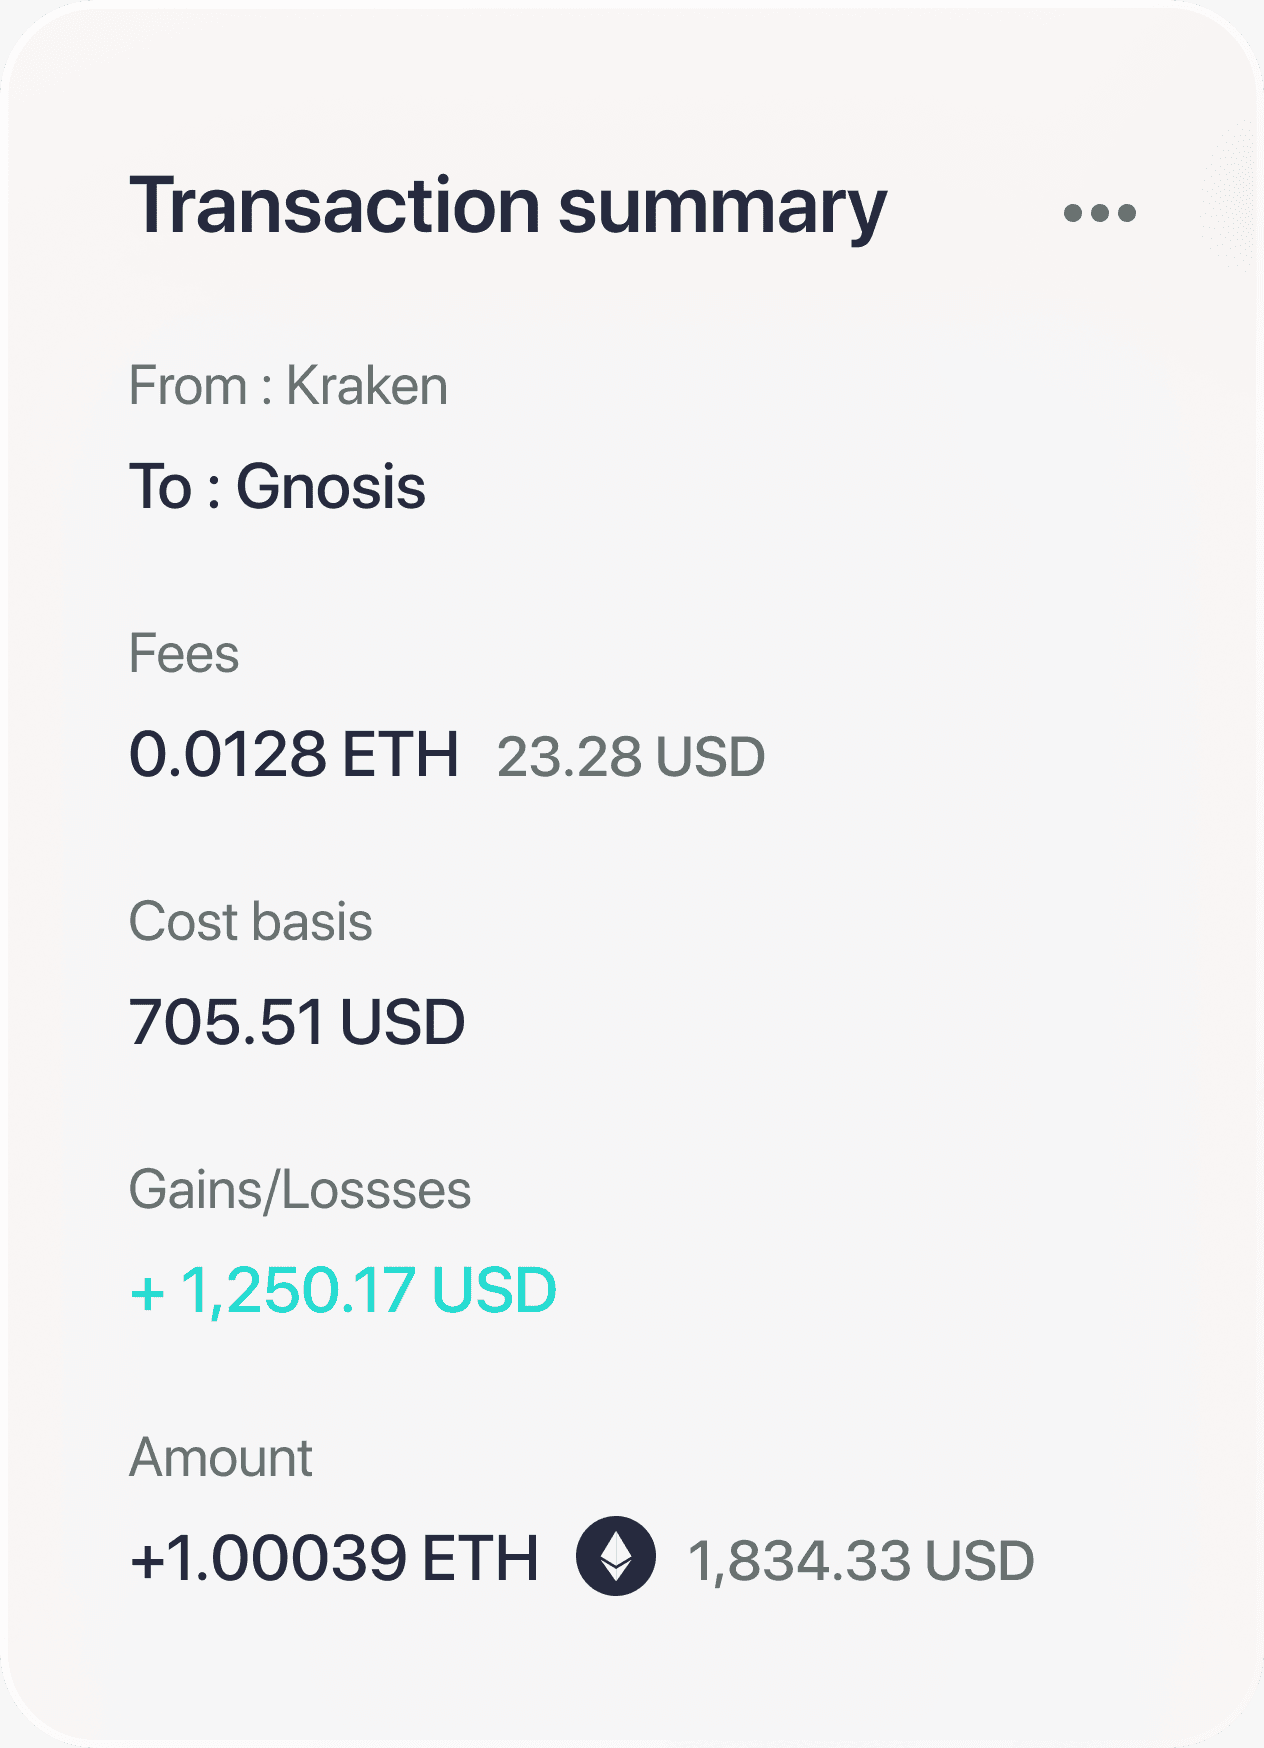 Summary of a transaction from Kraken to Gnosis, which contains the date of the transaction, the transaction type and the transaction amount